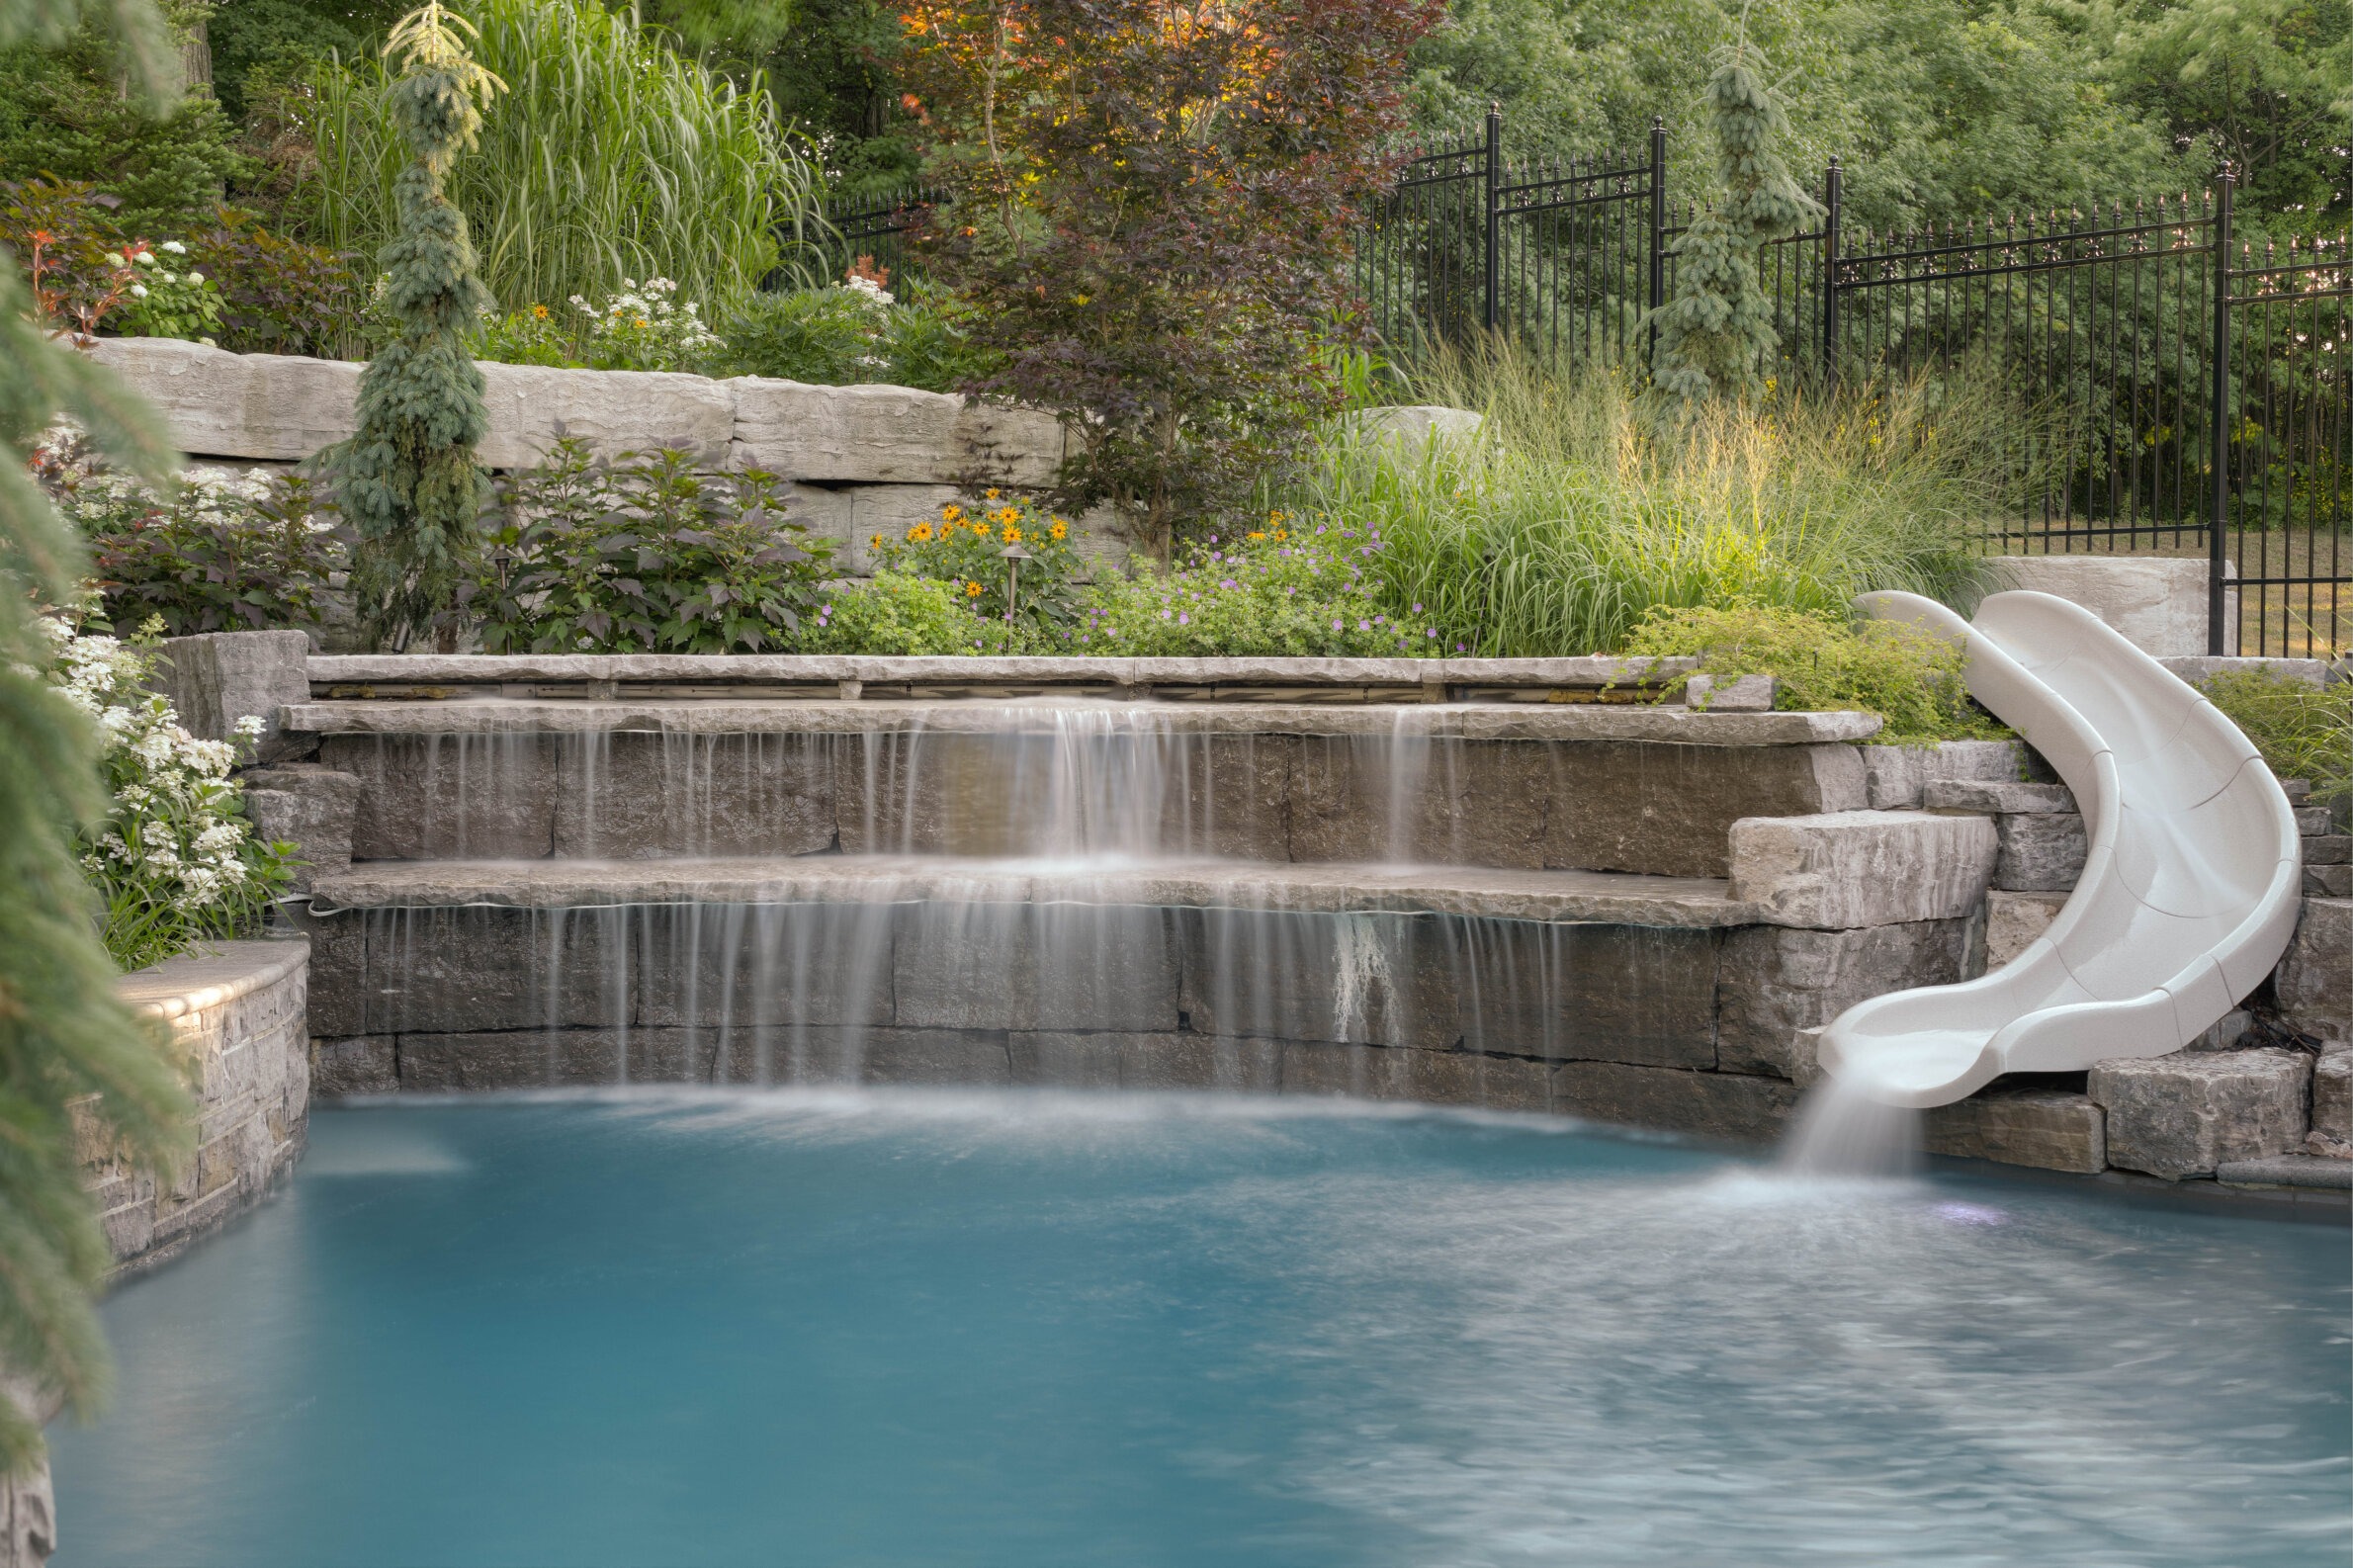 This image shows a tranquil backyard pool with a curved water slide and a cascading artificial rock waterfall set against lush greenery and flowers.